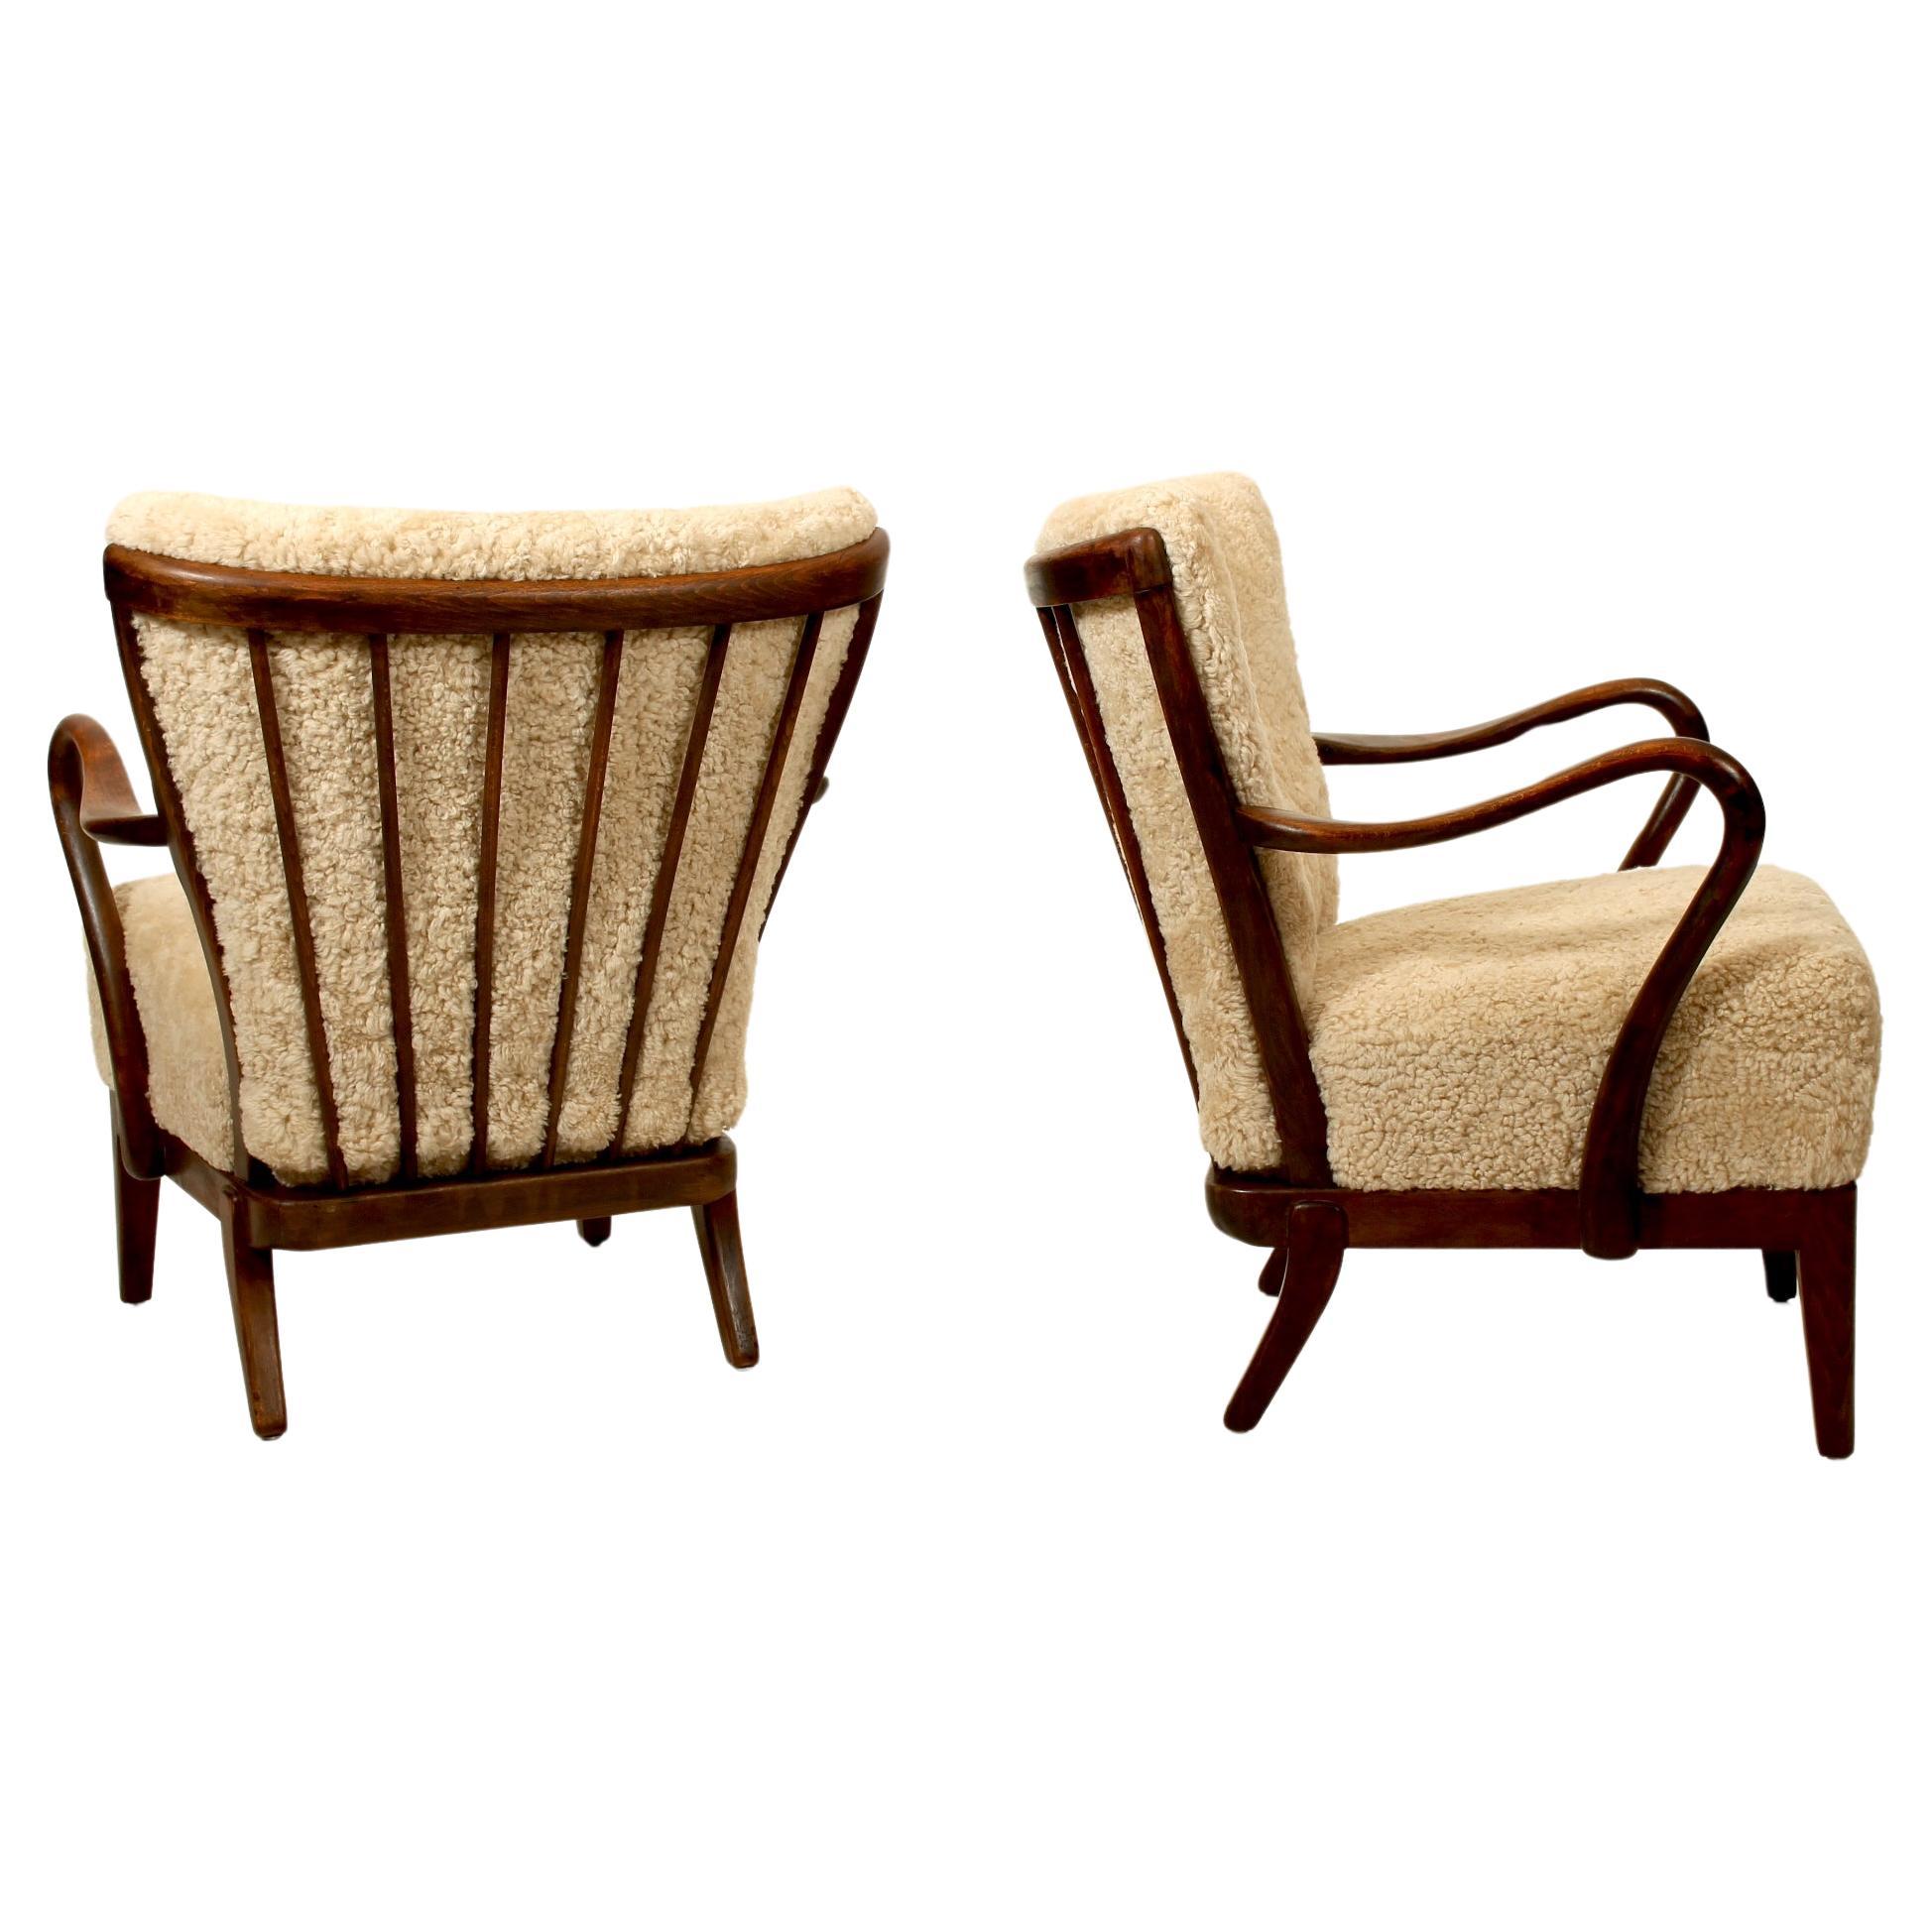 Pair of 1940s lounge chairs by Alfred Christensen, Denmark. For Sale